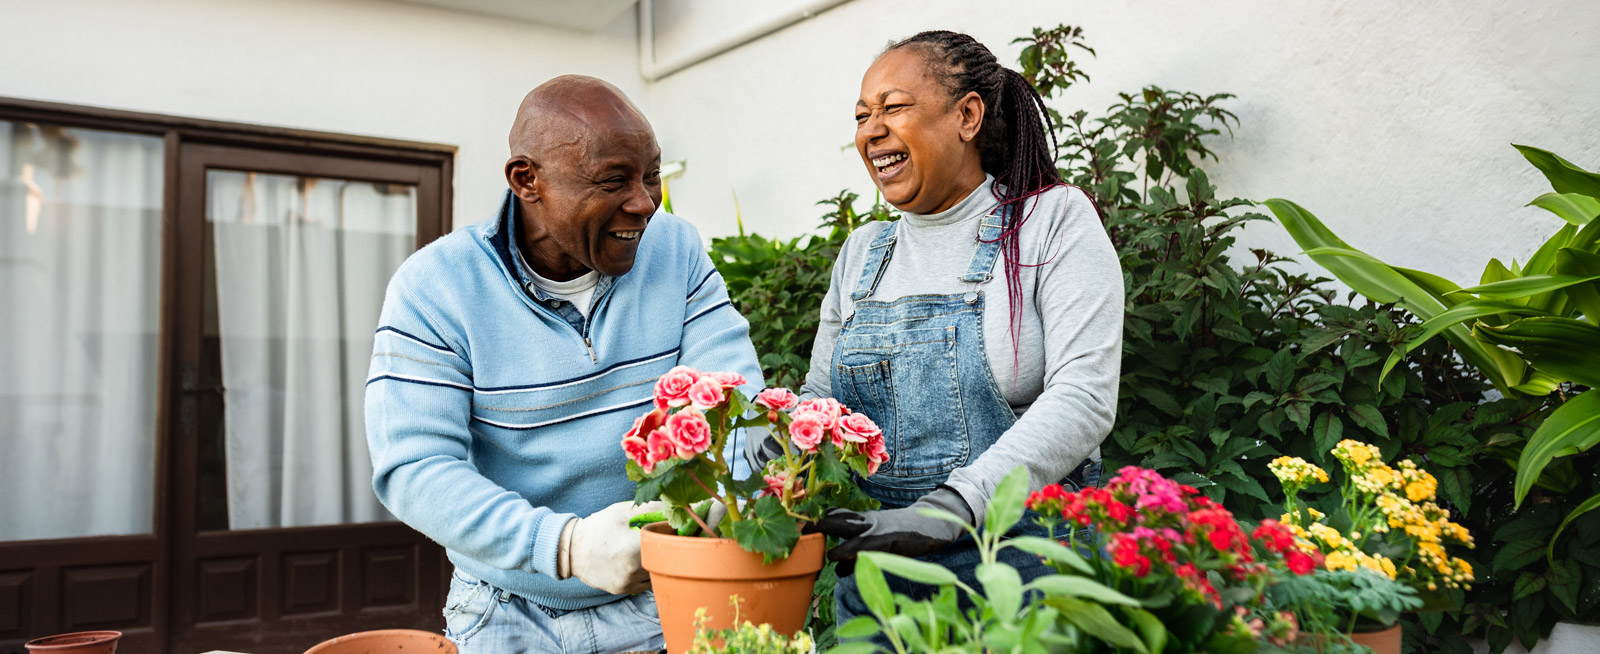 3 things you can do in a retirement home in surrey if you love to garden